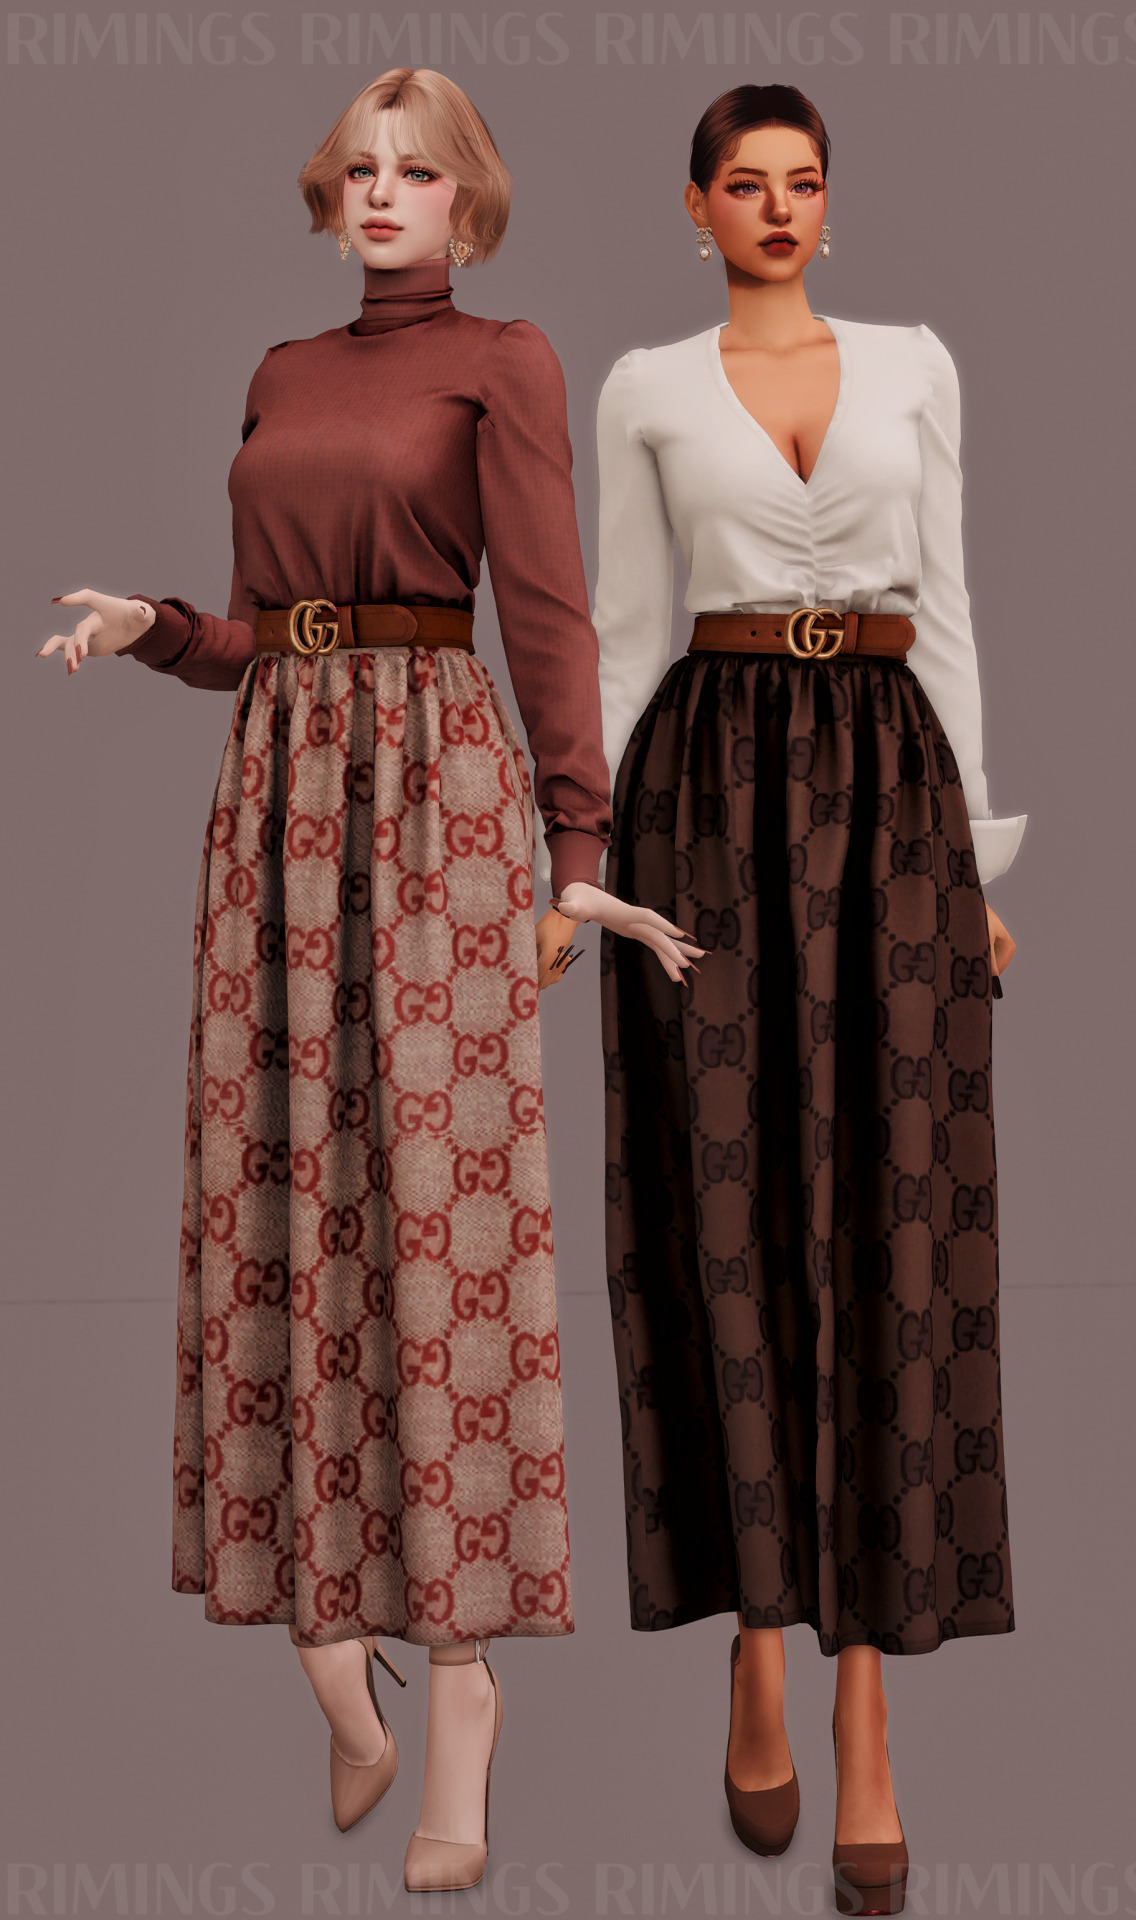 Skirt, V Neck Blouse and Turtleneck from Rimings • Sims 4 Downloads